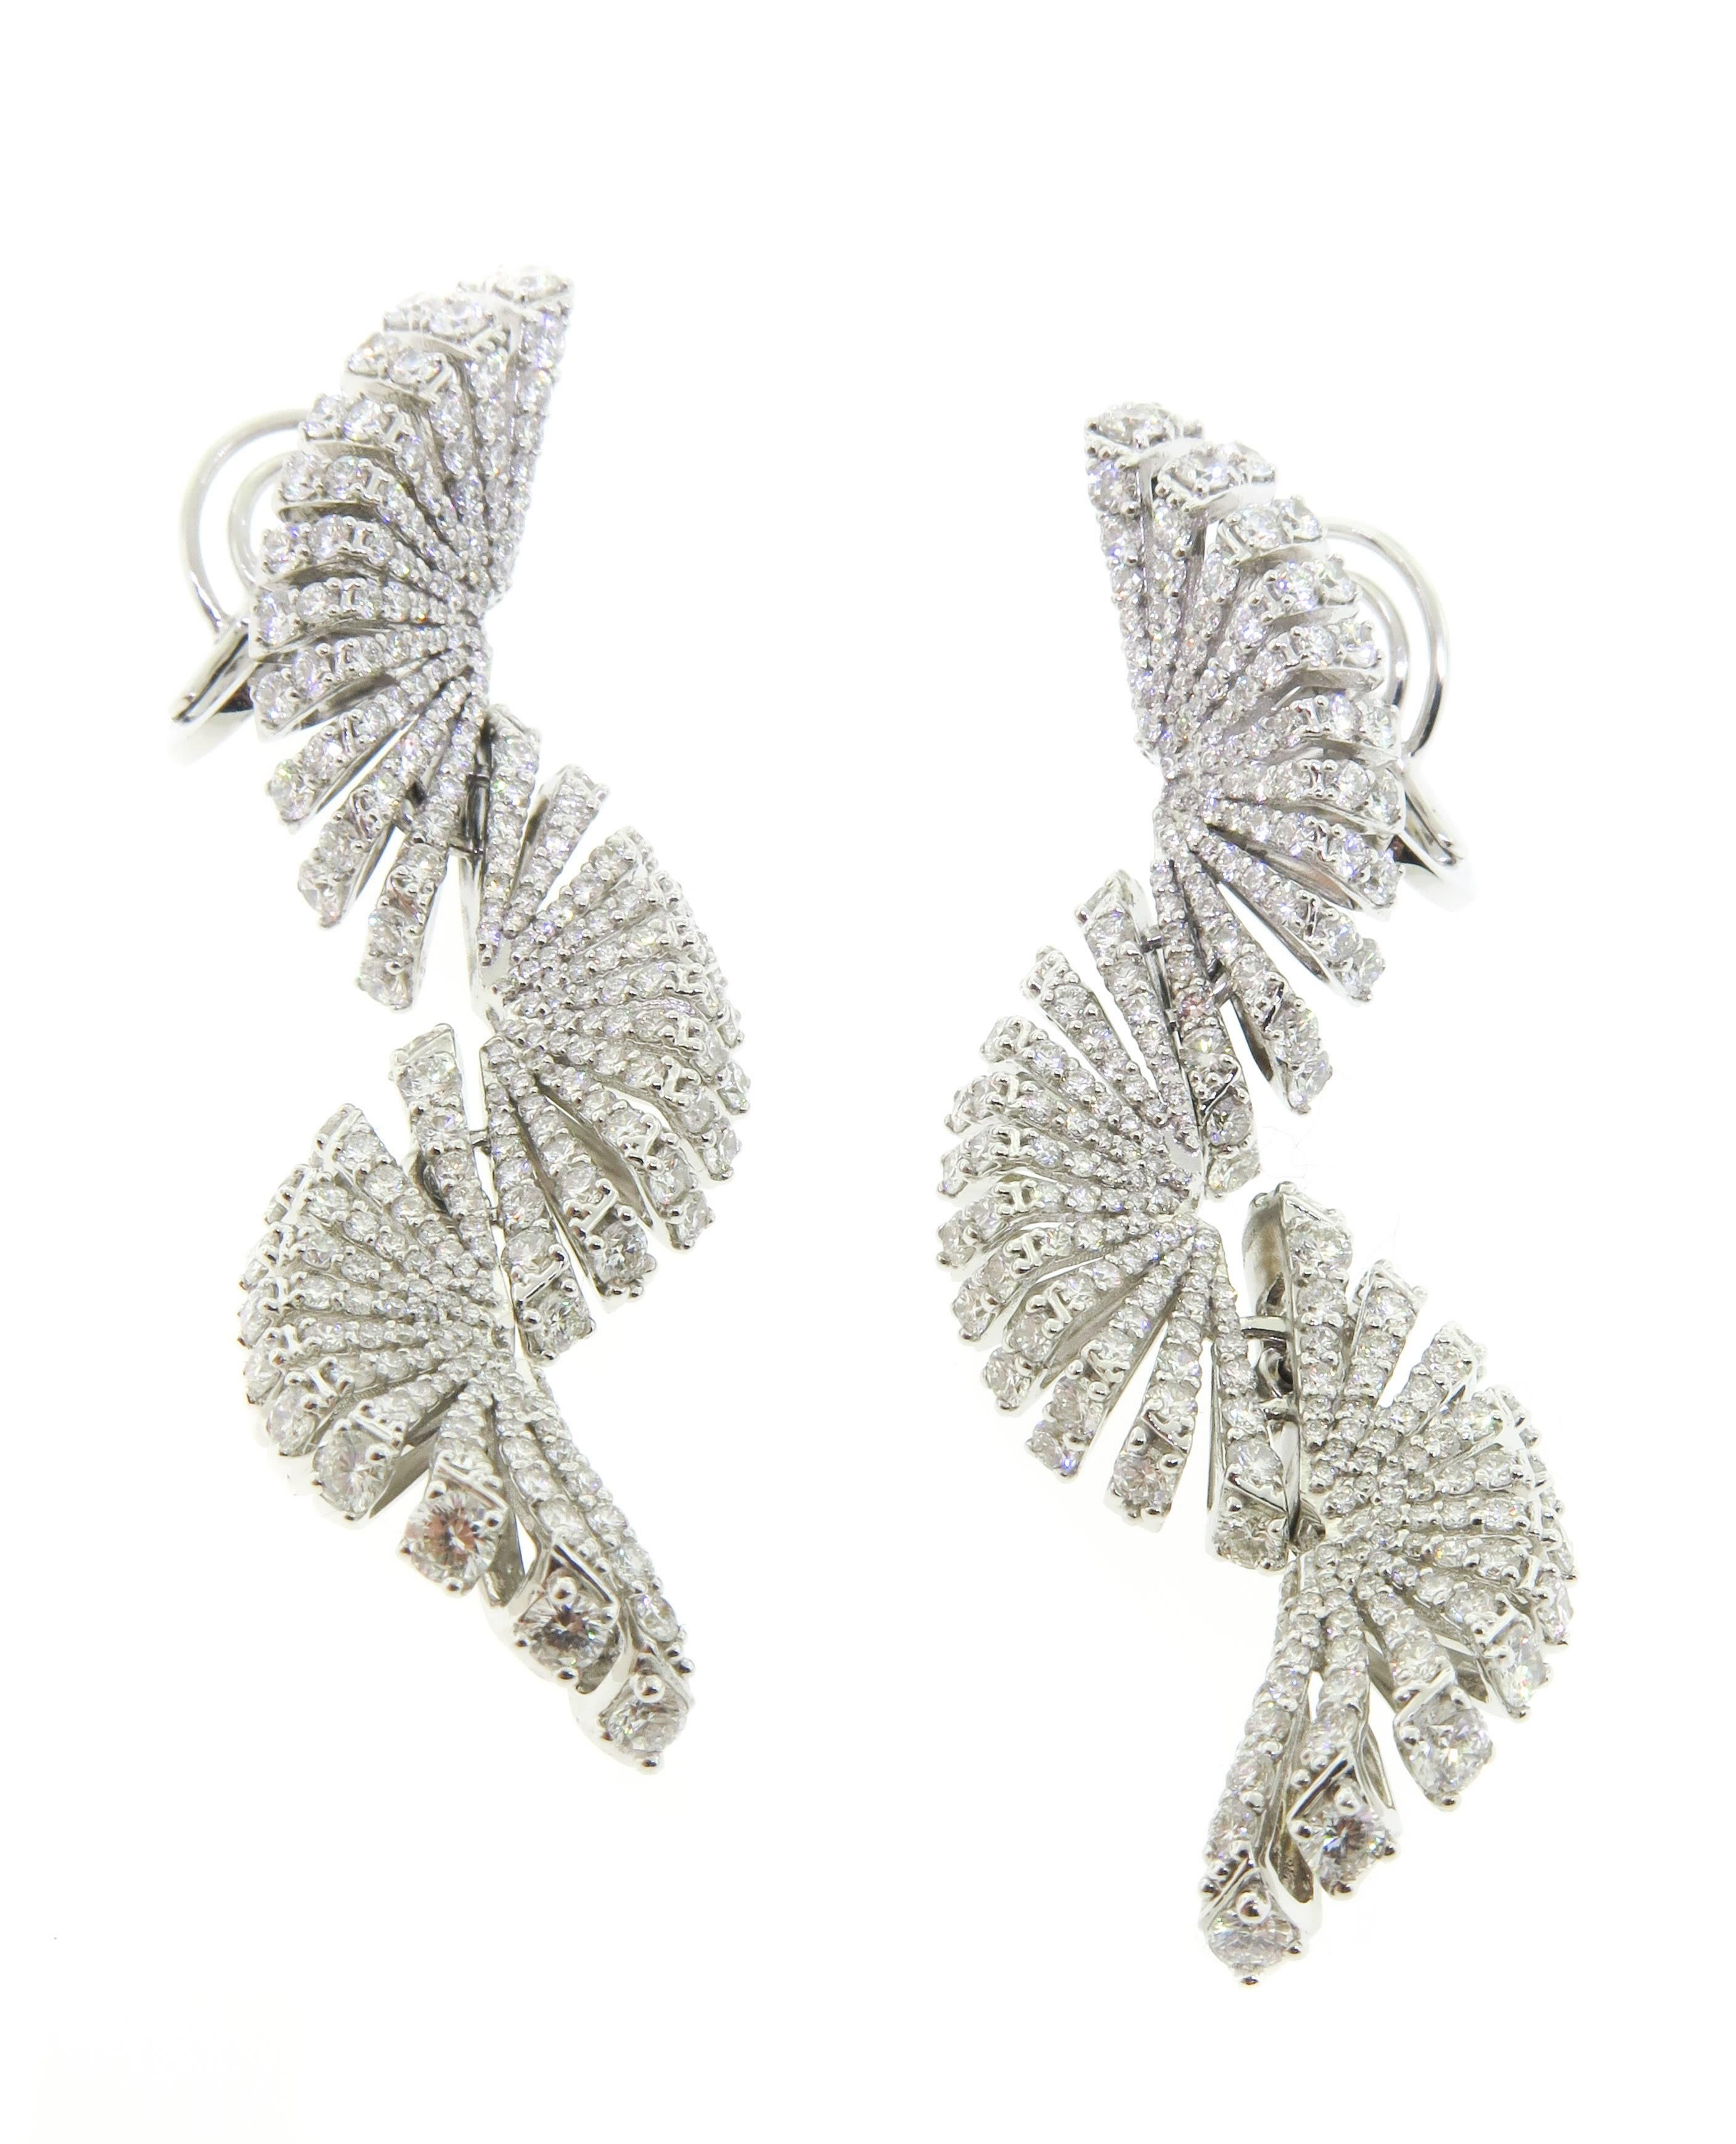 An icon of femininity... the fan symbolizes grace and movement, elegance and mystery. Dating back to 400 BC. the fan is one of the oldest women's accessory. The delicate lines and movement is translated beautifully into this stylish drop earrings